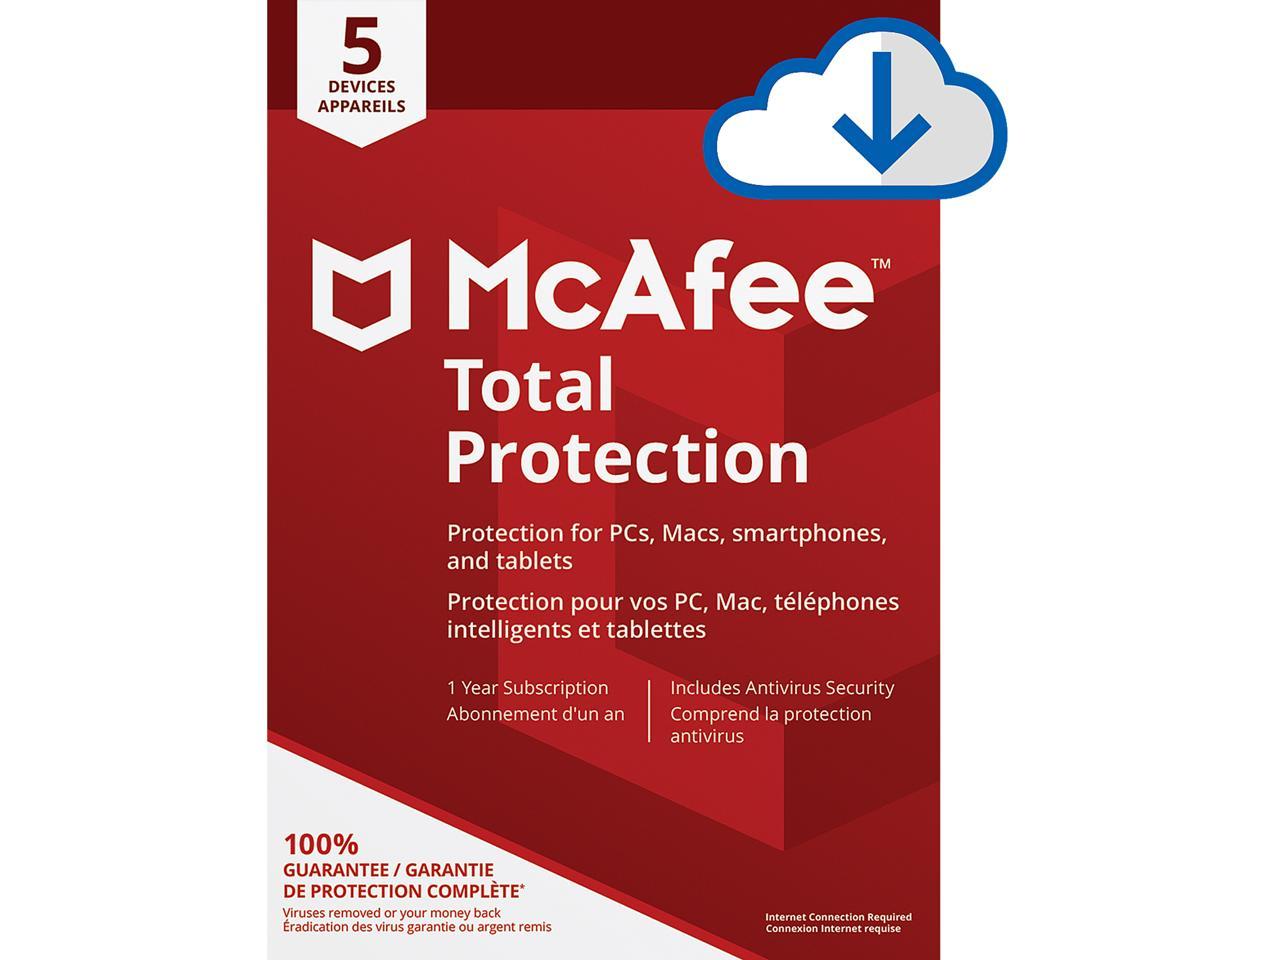 mcafee total protection 5 devices 1 year